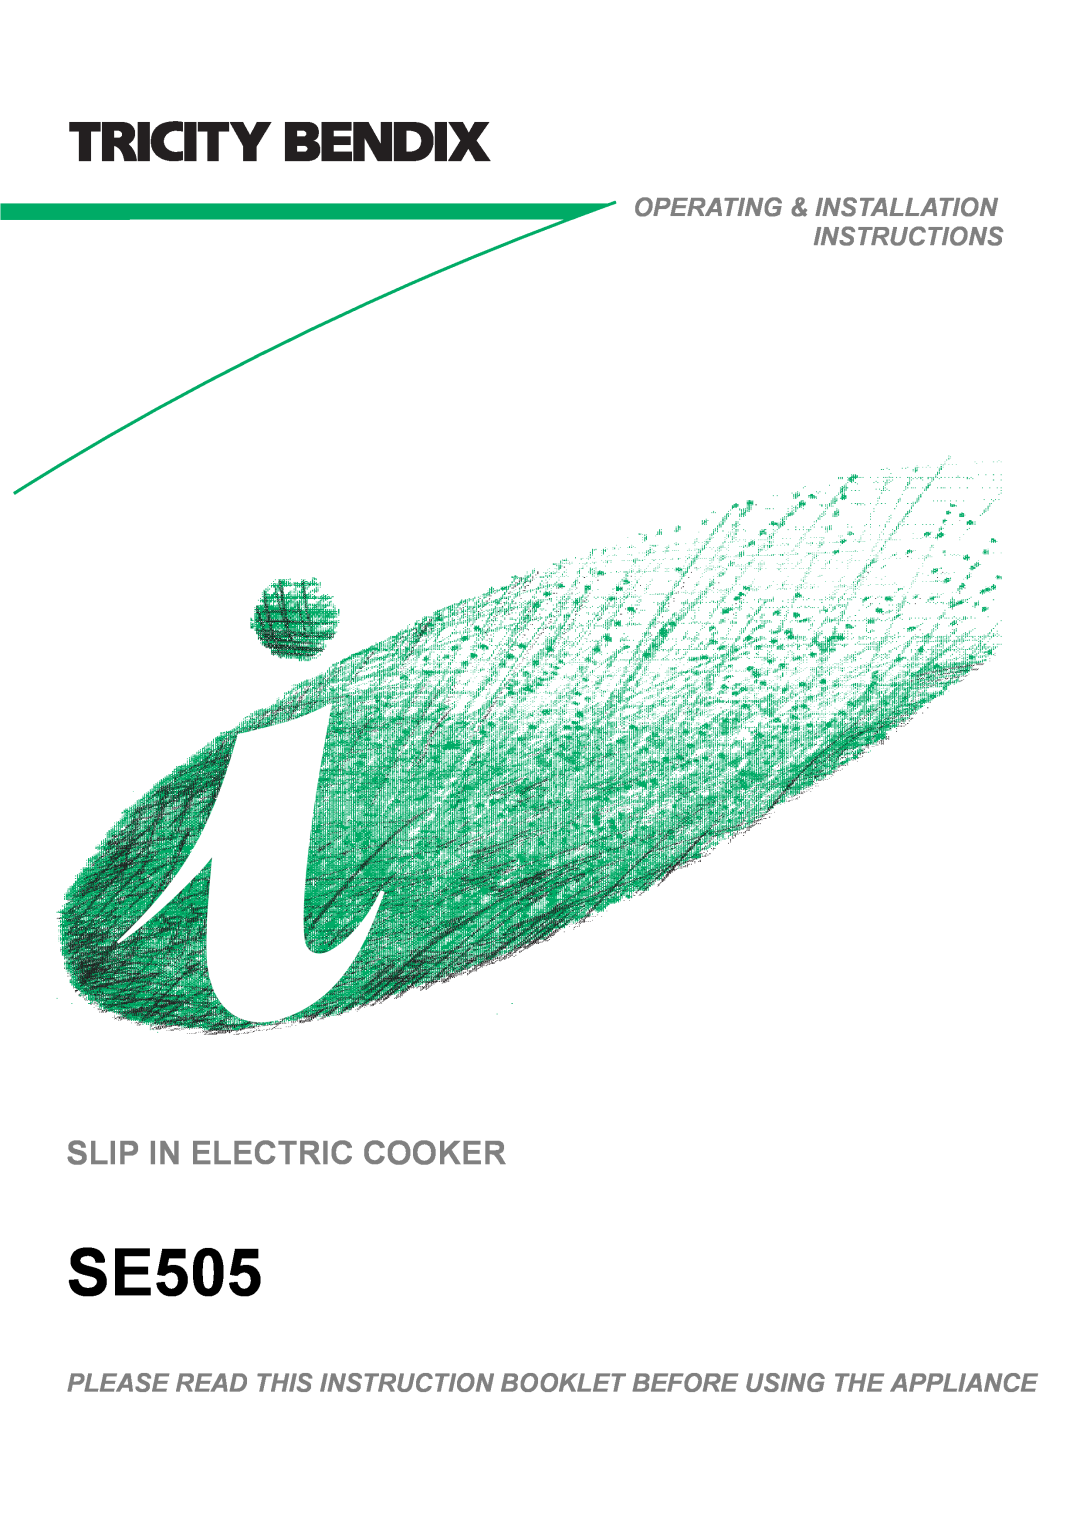 Tricity Bendix SE505 installation instructions Slip In Electric Cooker, Operating & Installation Instructions 